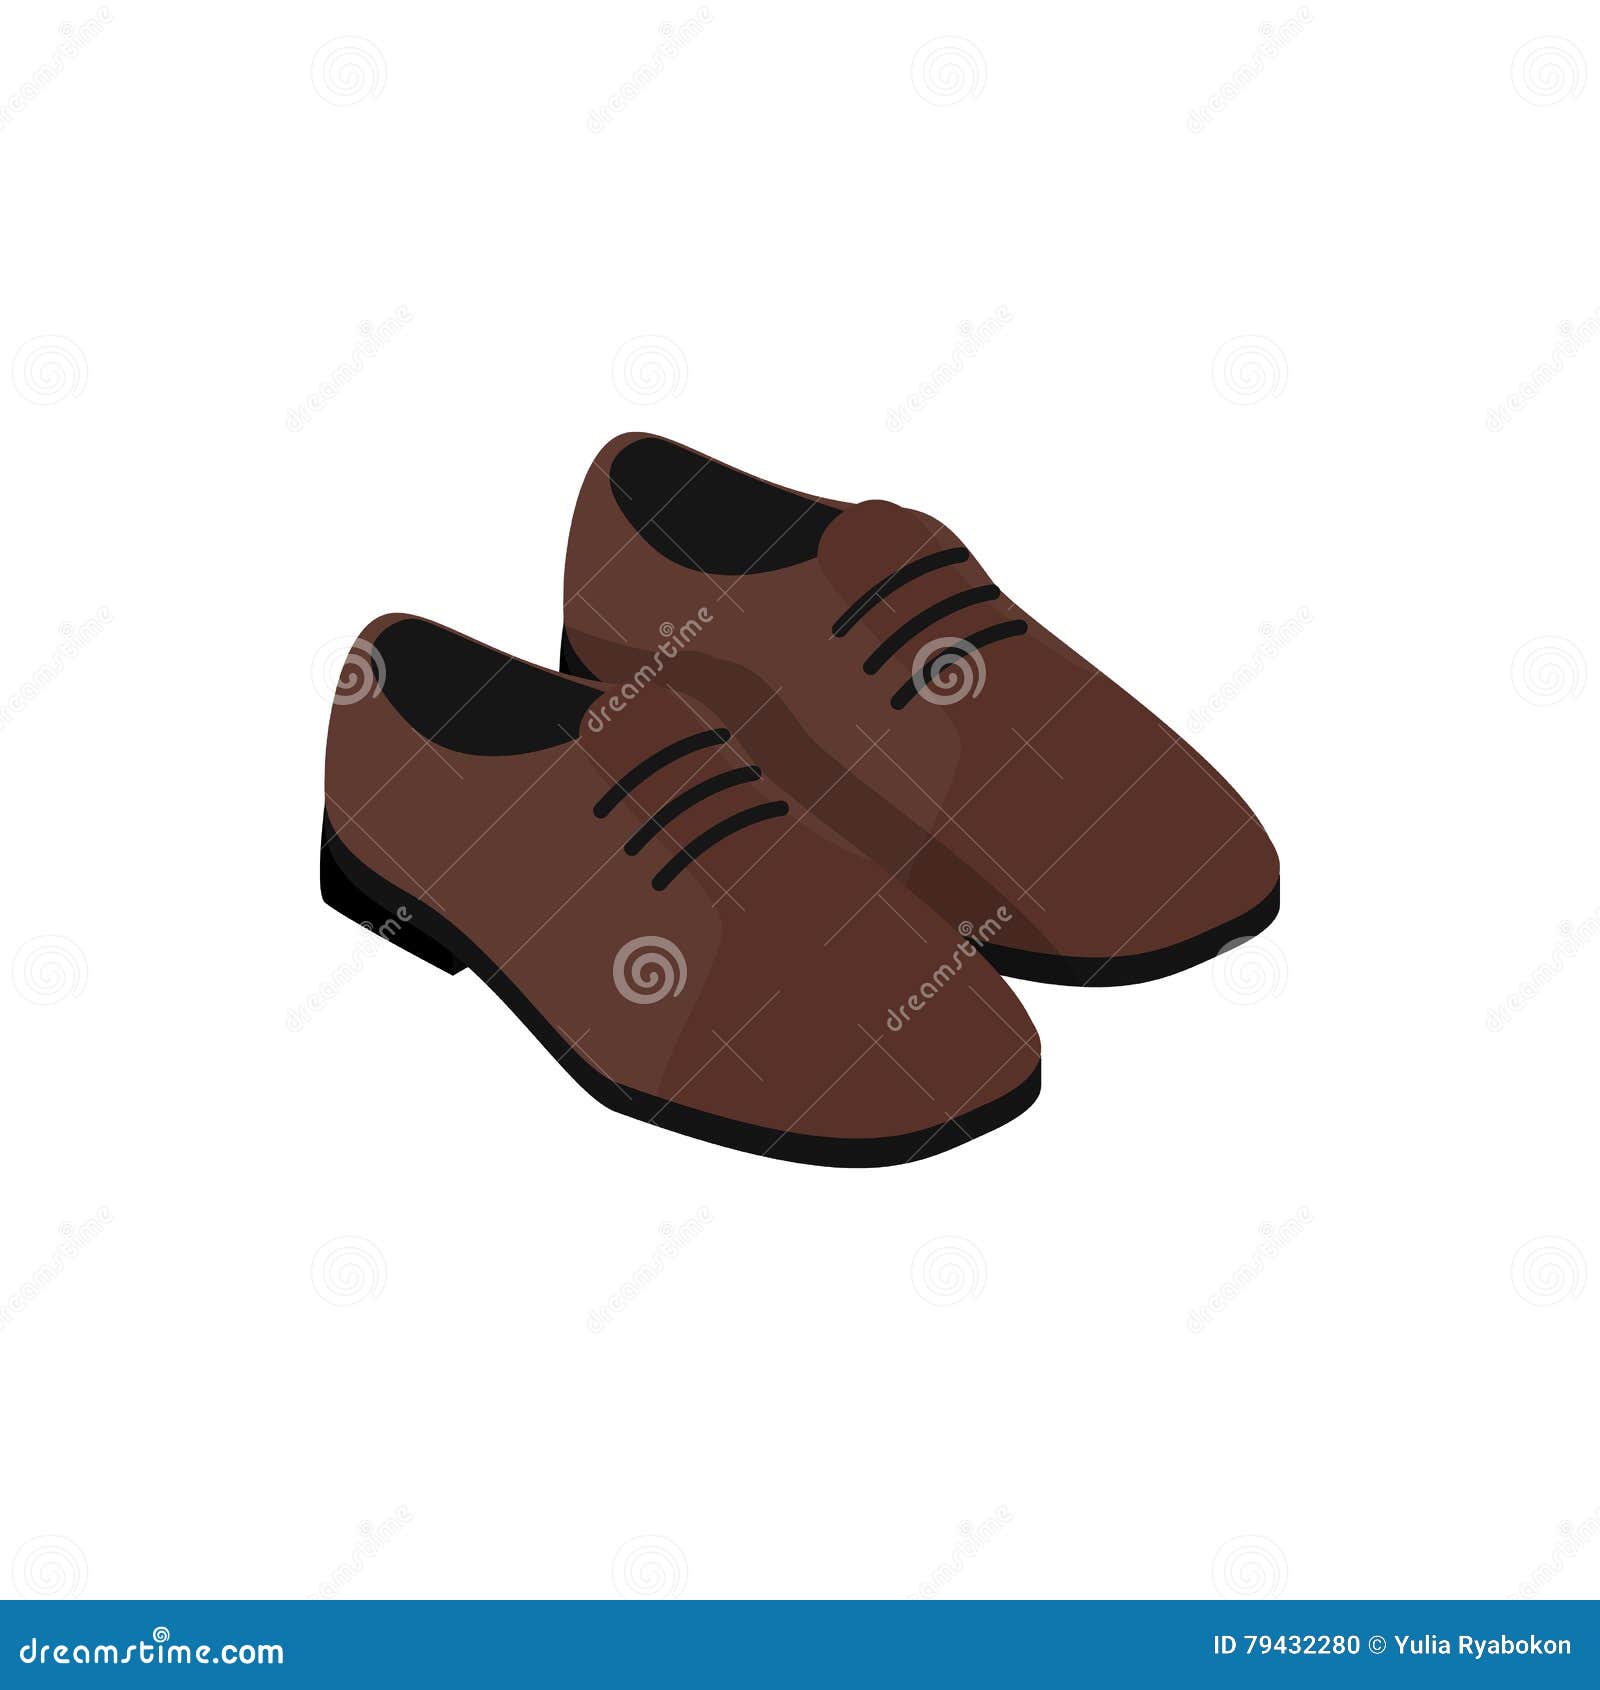 Pair of Brown Leather Shoes Icon Stock Vector - Illustration of pair ...